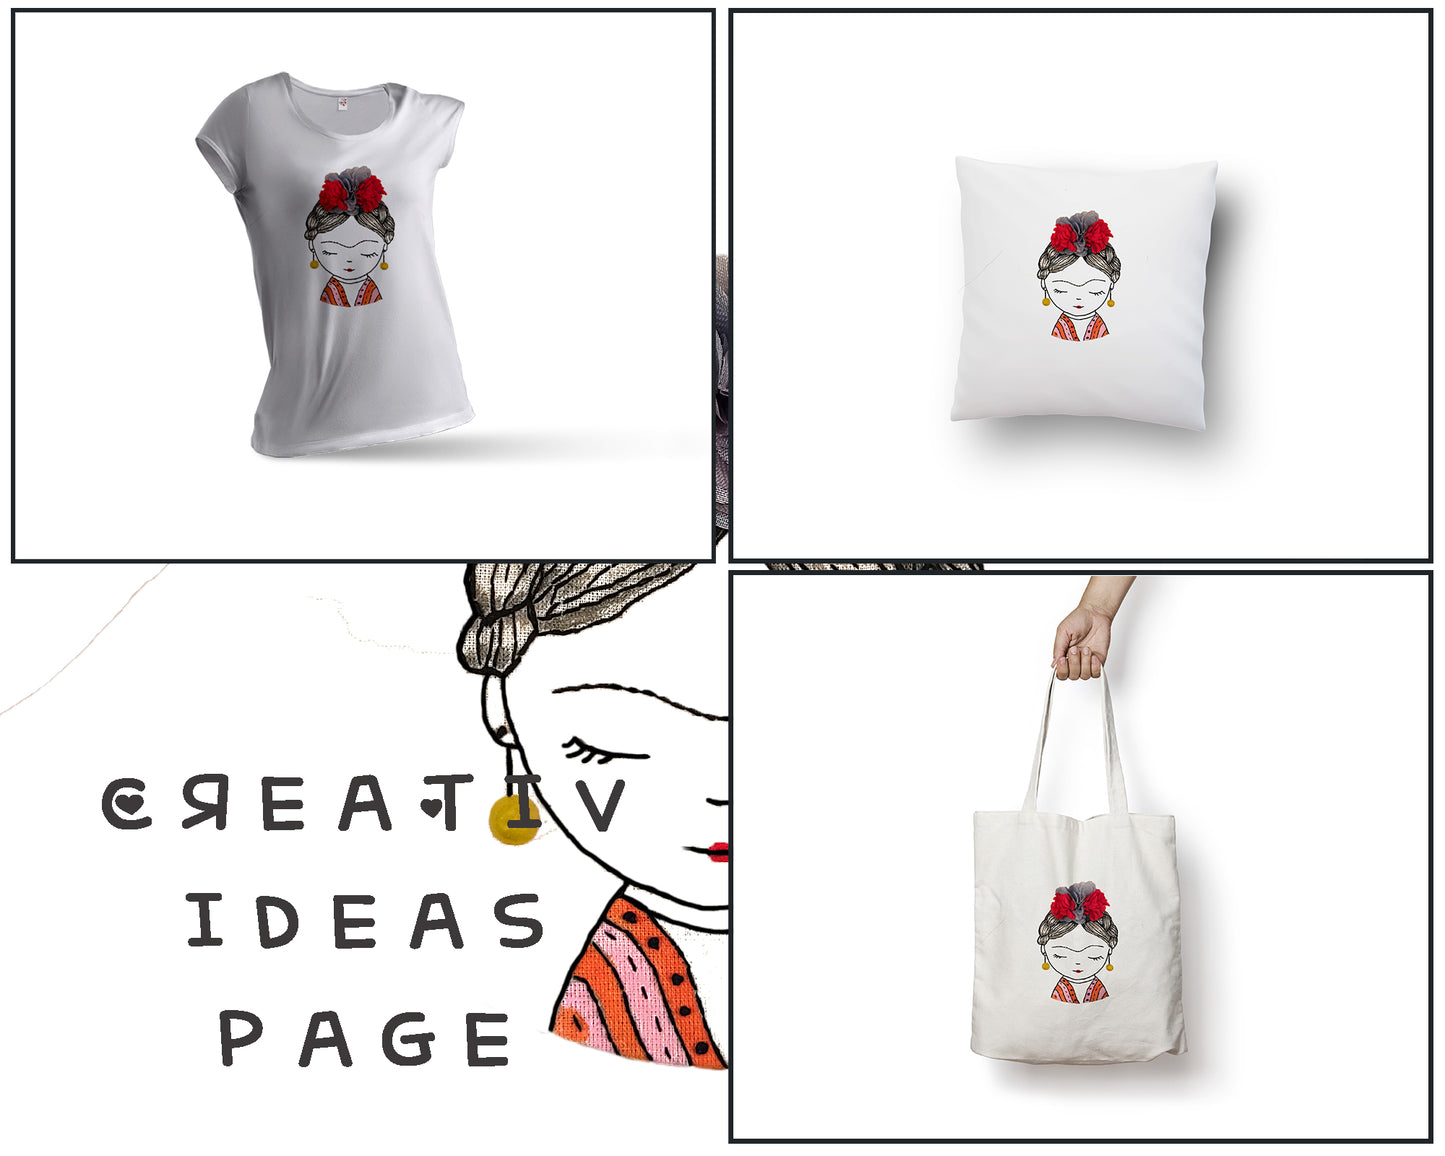 Frida Kahlo - PDF embroidery pattern and tutorial 08